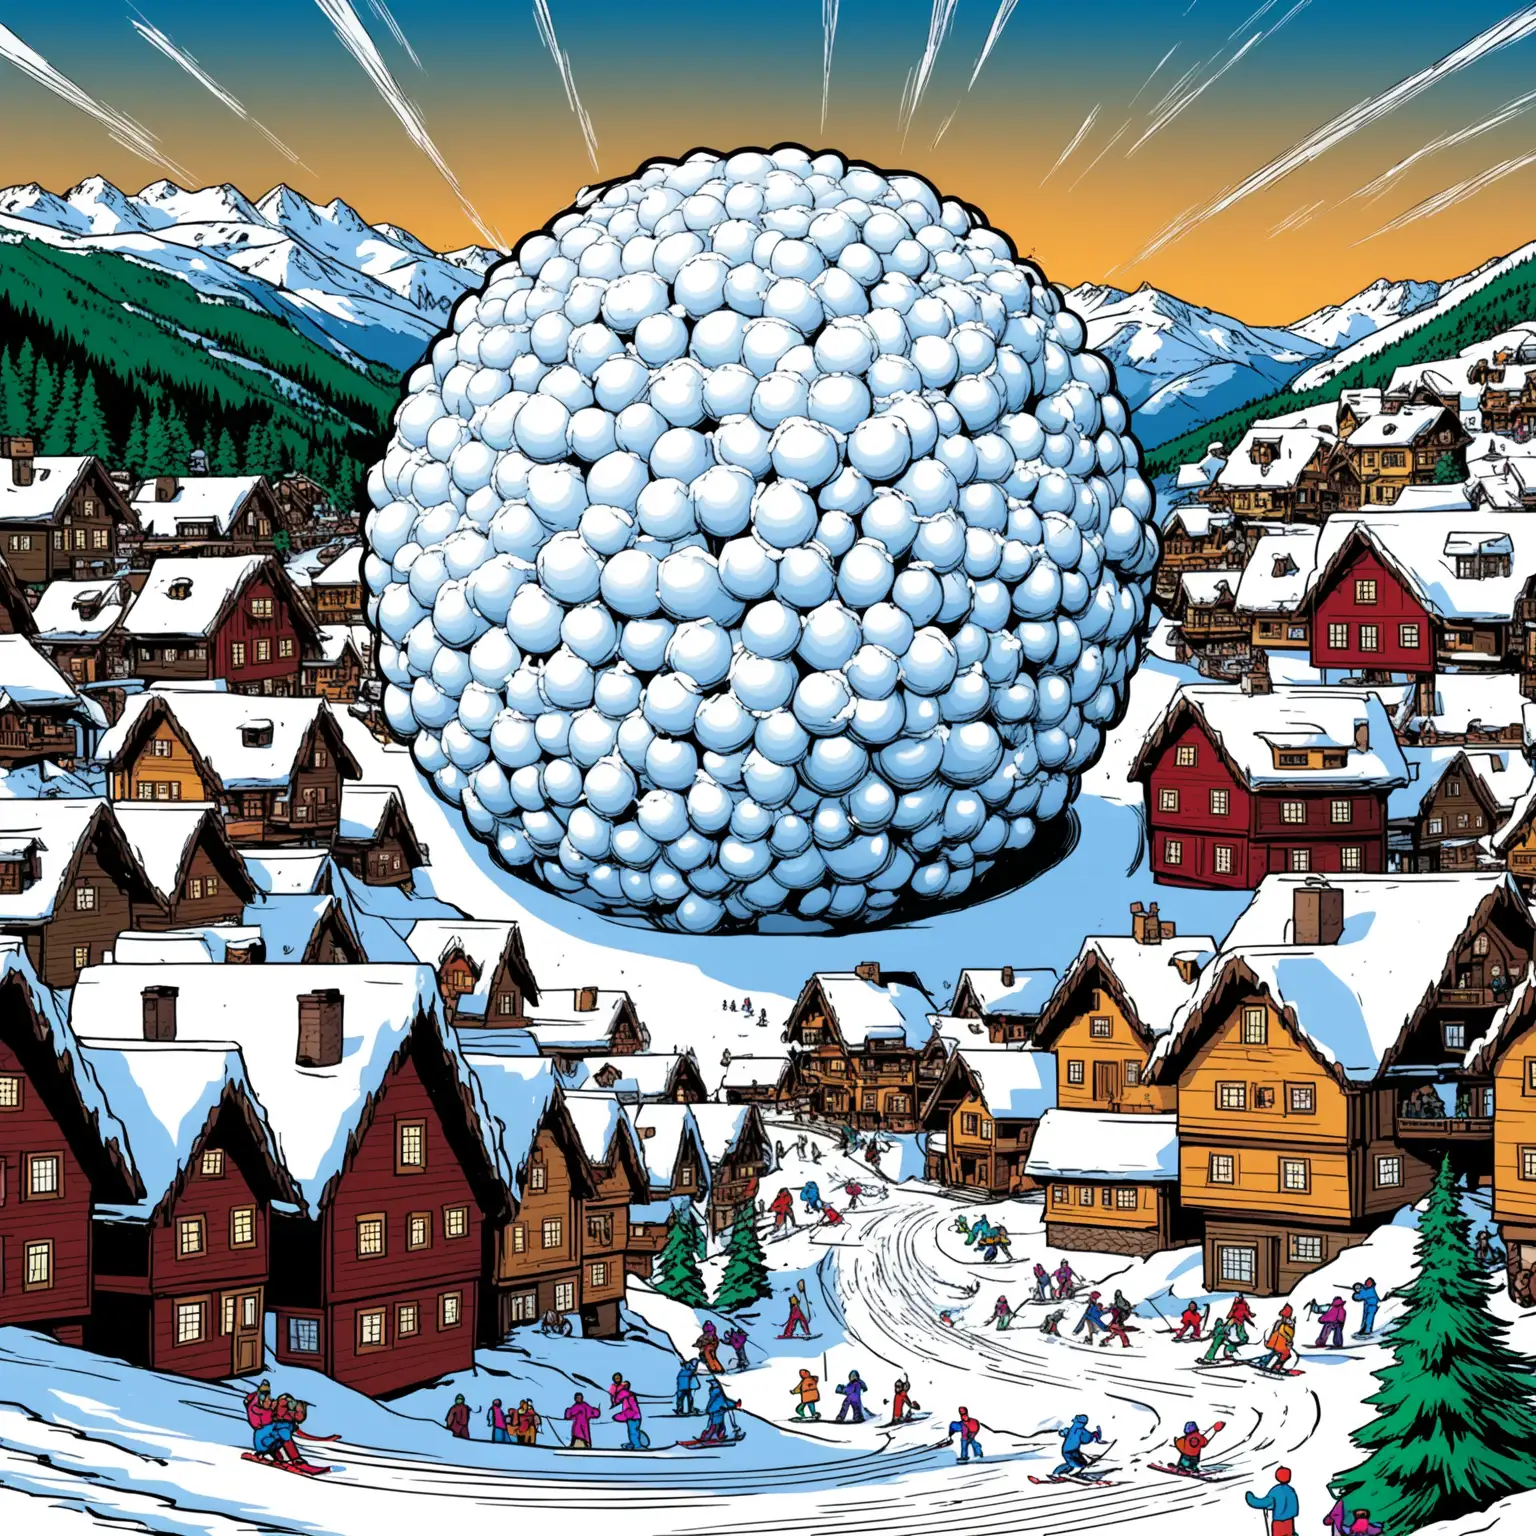 Create a Comic book image of a huge snow ball rolling down a snowy mountain with a ski village in its pathway. The snow ball is in motion 